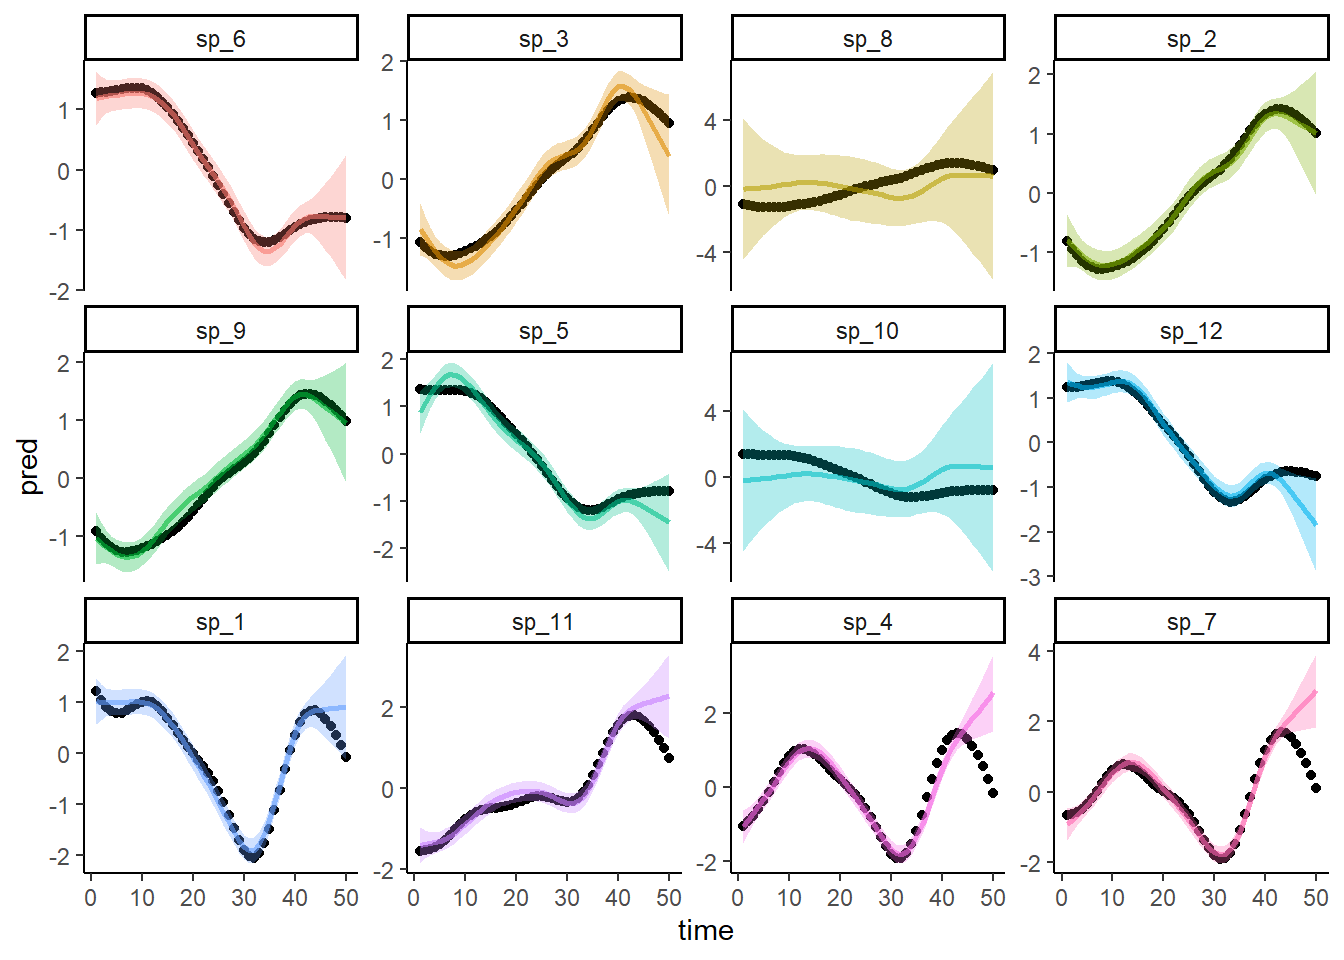 Predicting species' nonlinear time trends using hierarchical Generalized Additive Models.